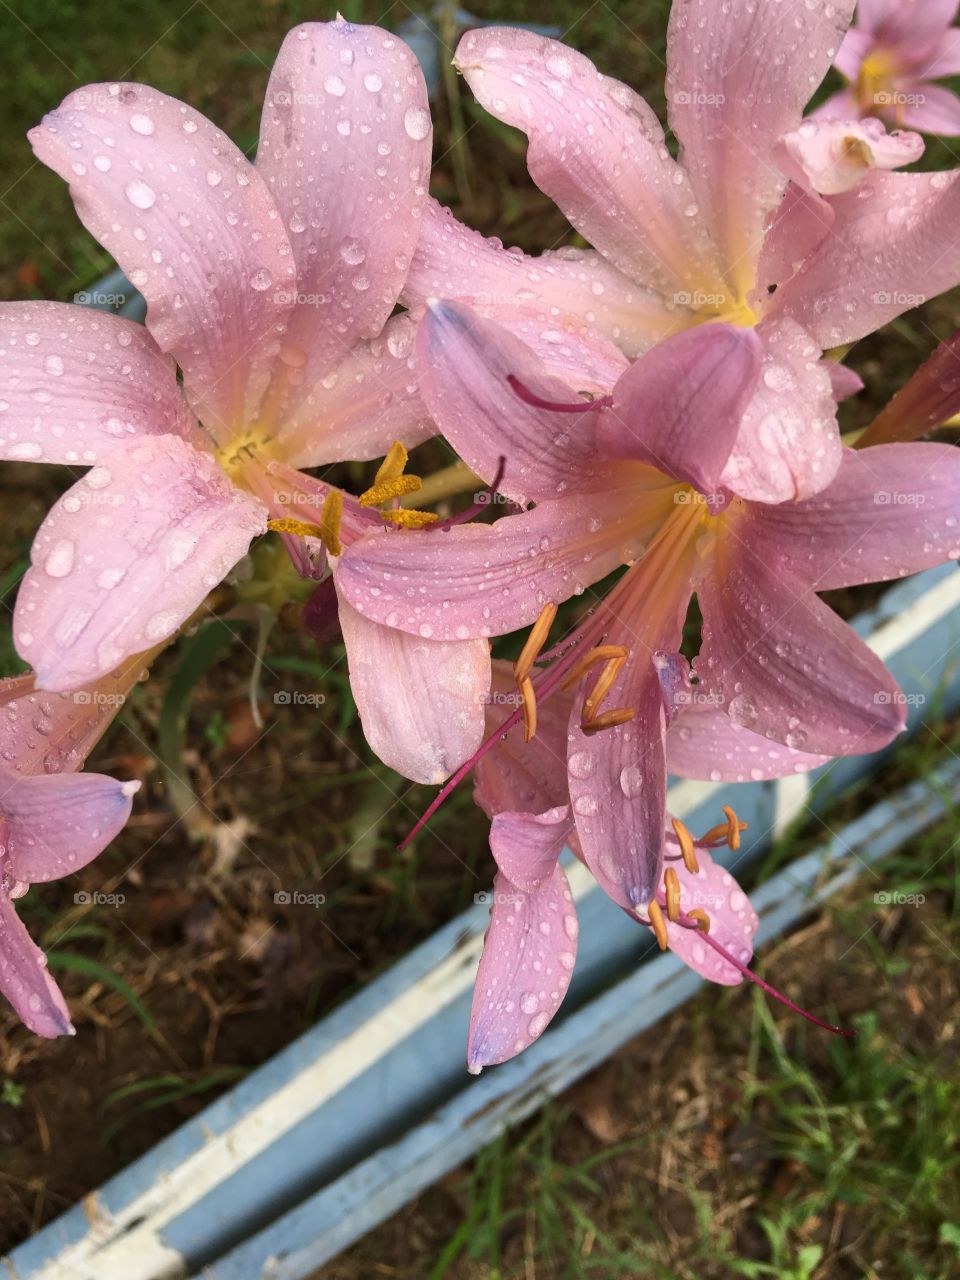 I love this time of year I hate to see it coming to an end. Rain drops on the petals 